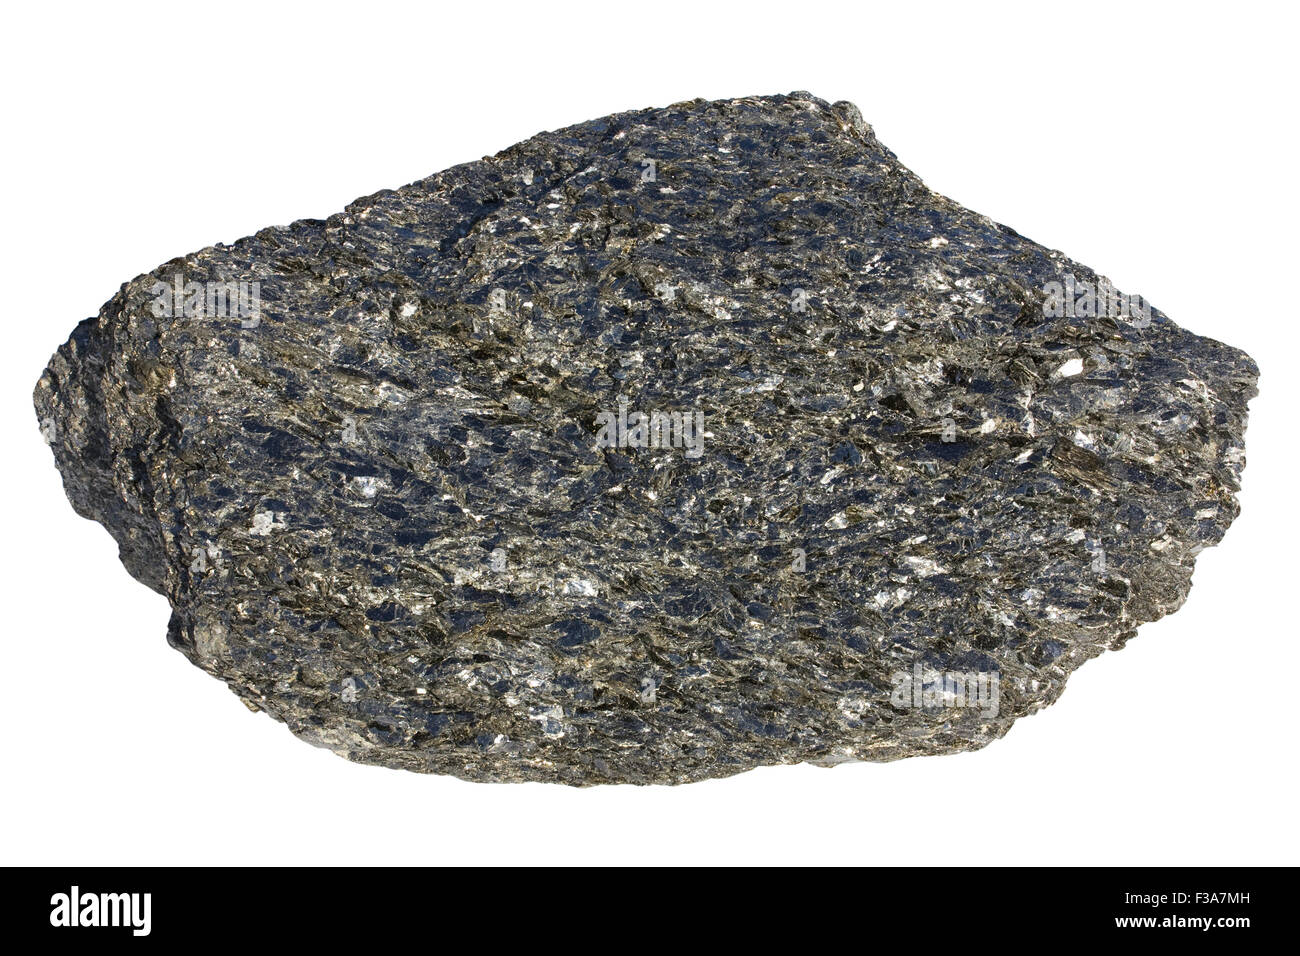 Biotite-rock (glimmerite). This rock is composed of only one mineral - iron-rich mica biotite. Stock Photo